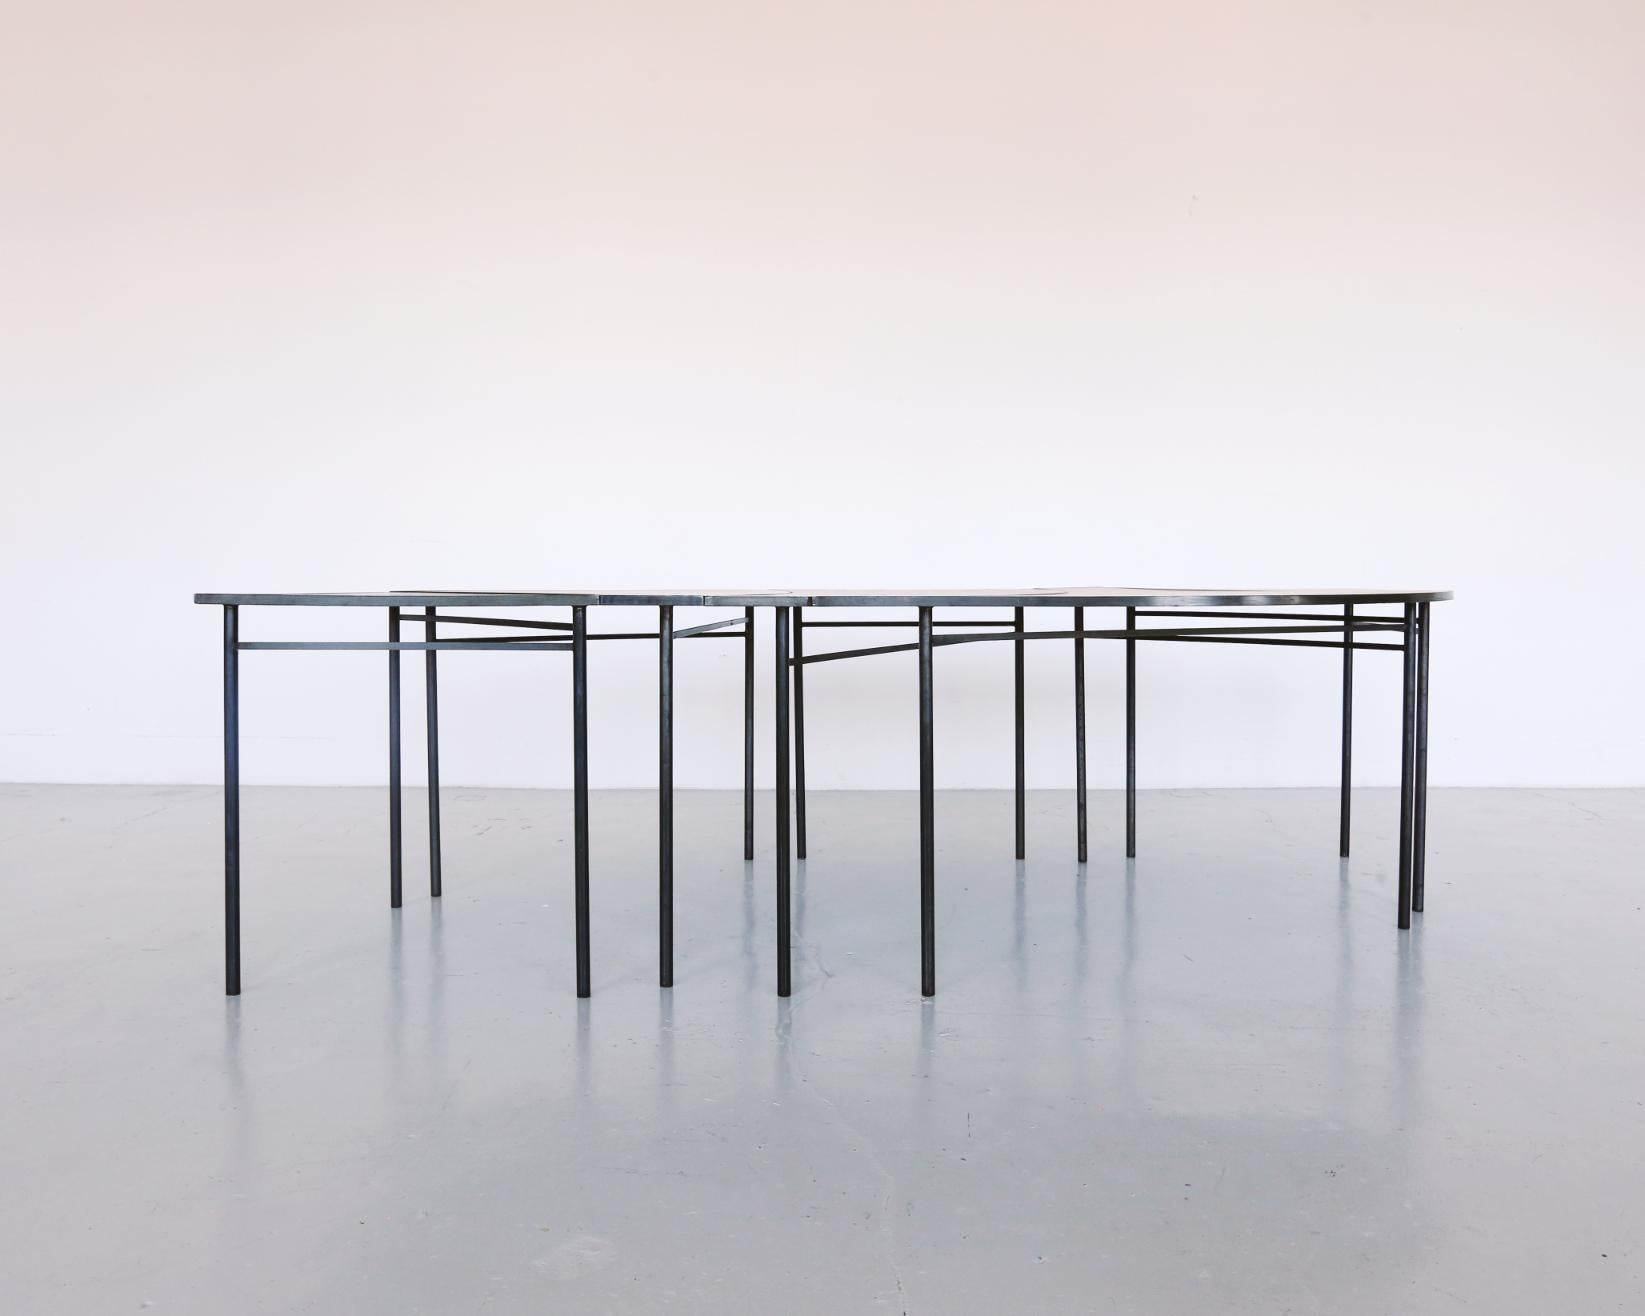 Set of 5 Tabula [non] rasa tables by Studio Traccia
Dimensions: W 280 x D 140 x H 74 cm
Materials: Steel.
Different combinations are available

The table was designed for our installation called tabula[non]rasa developed for Milan Design Week